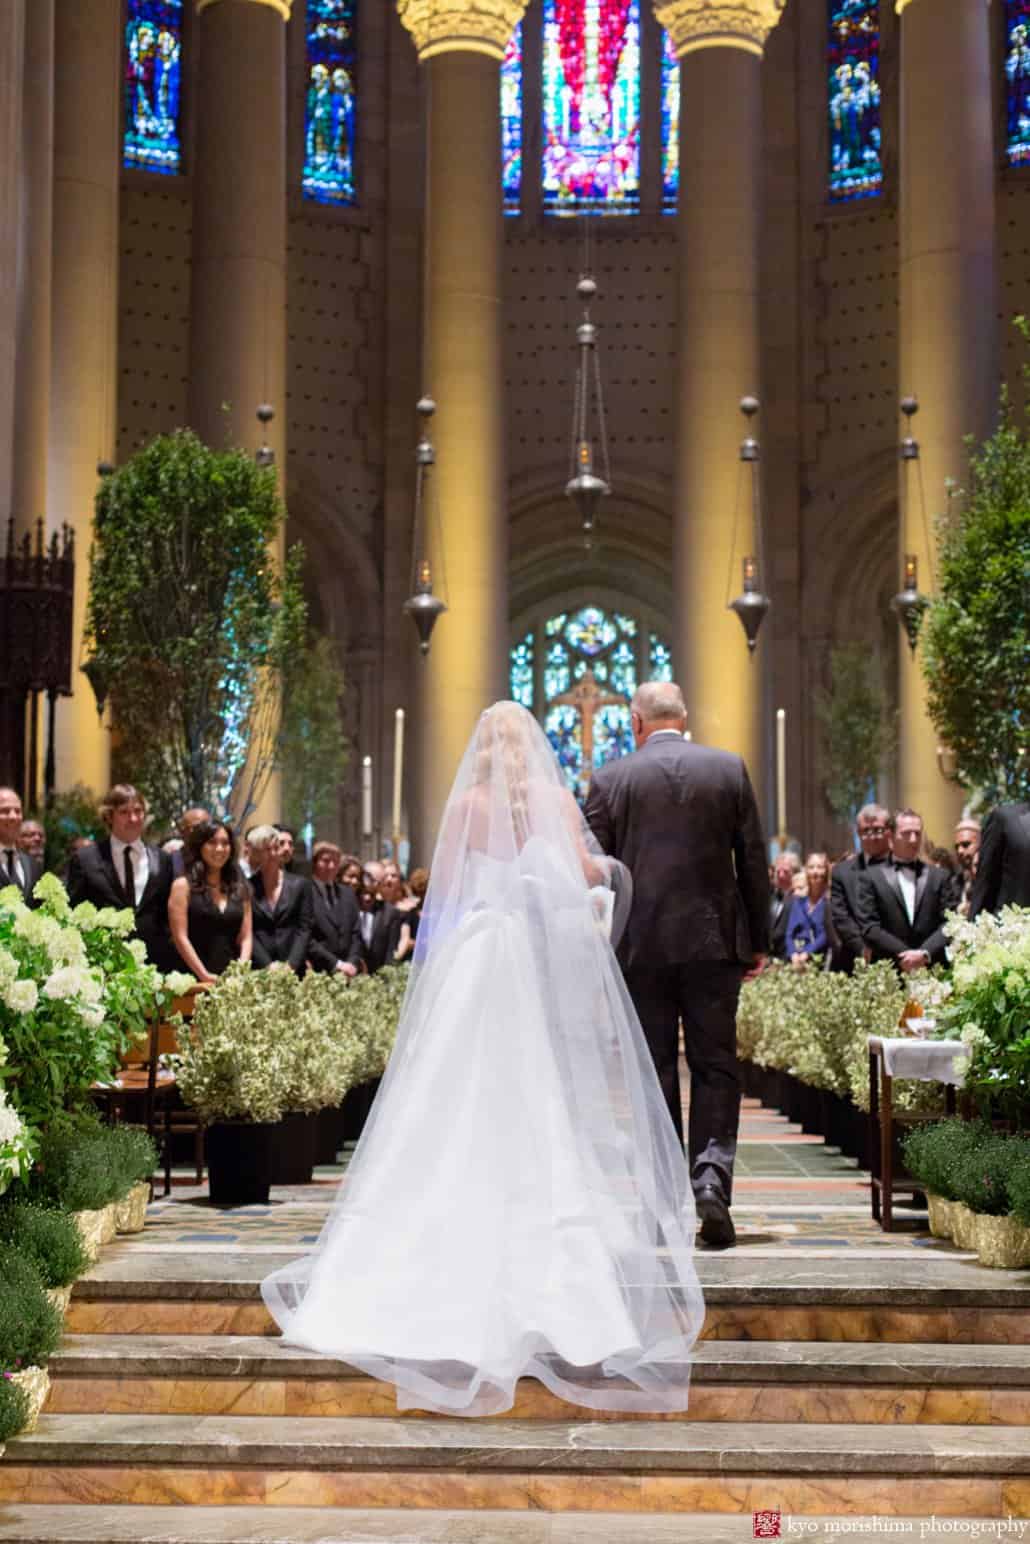 Bride and uncle walk down the aisle as St. John the Divine wedding begins, photographed by Kyo Morishima